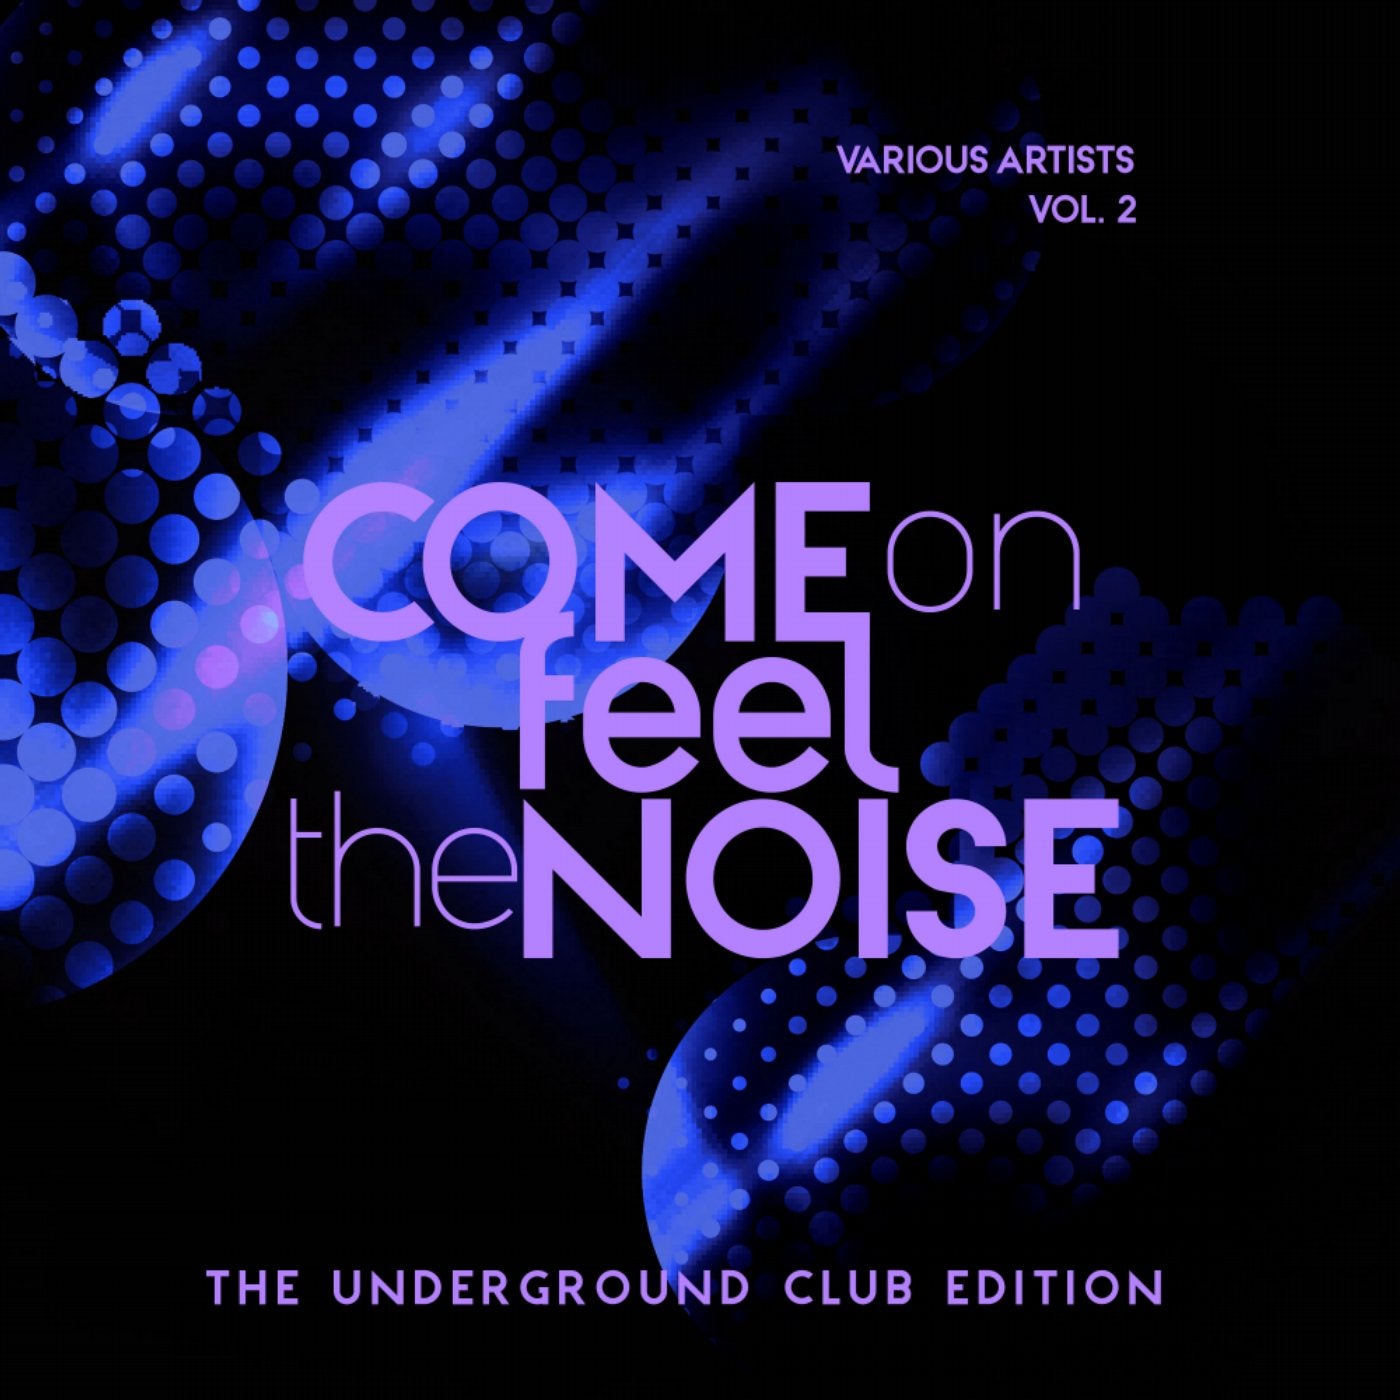 Come On Feel The Noise (The Underground Club Edition), Vol. 2